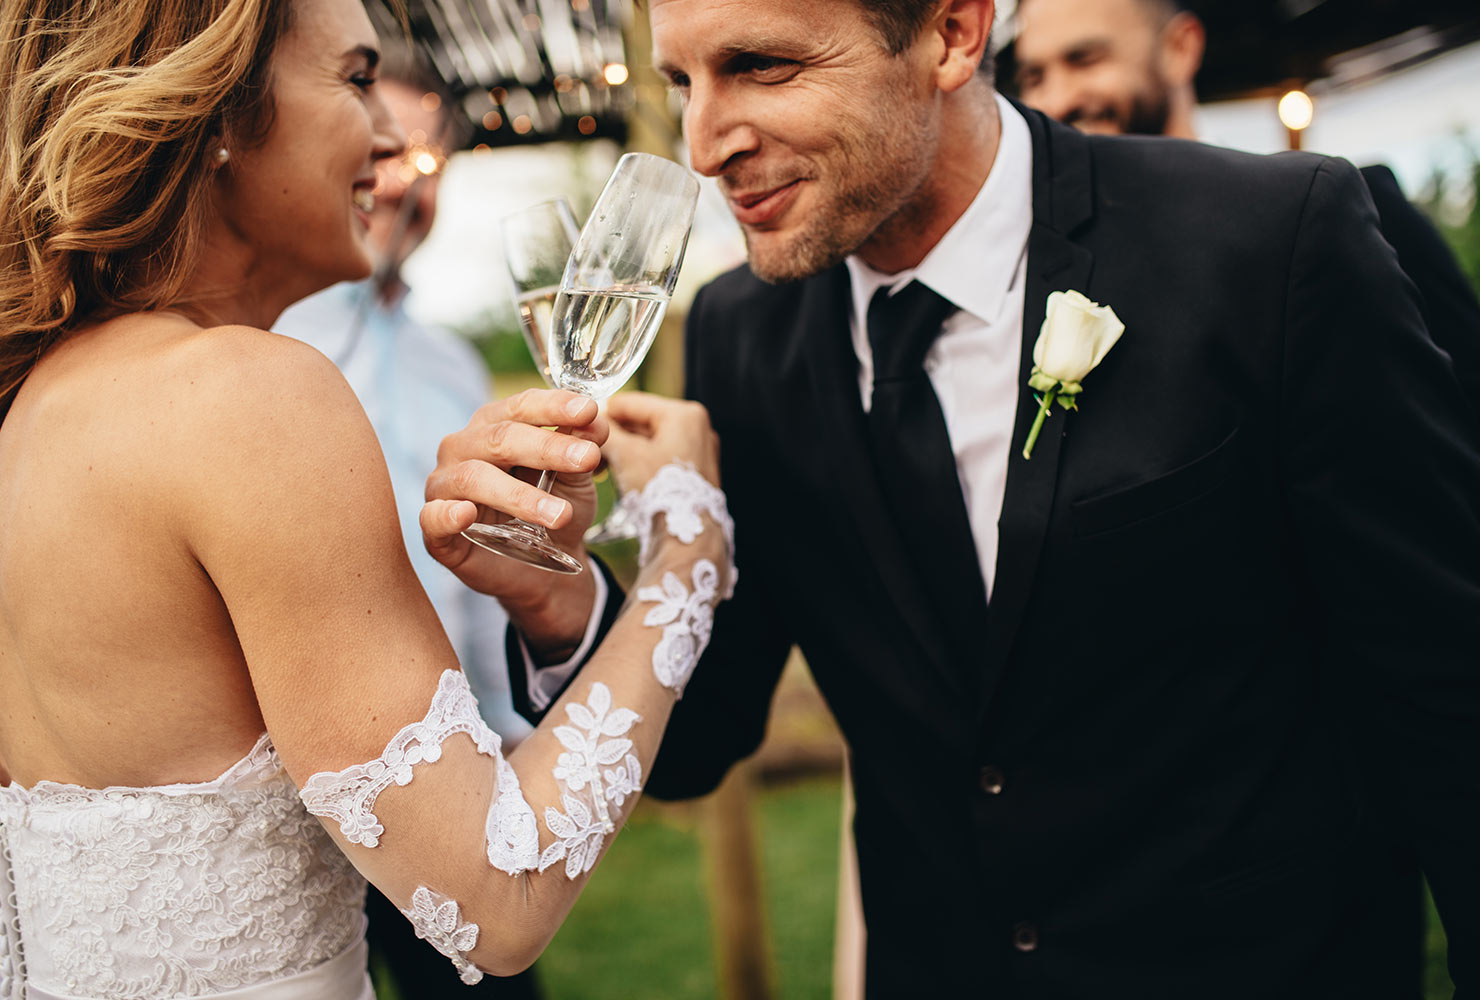 A bridge and groom sip champagne with the arms interlocked. arms